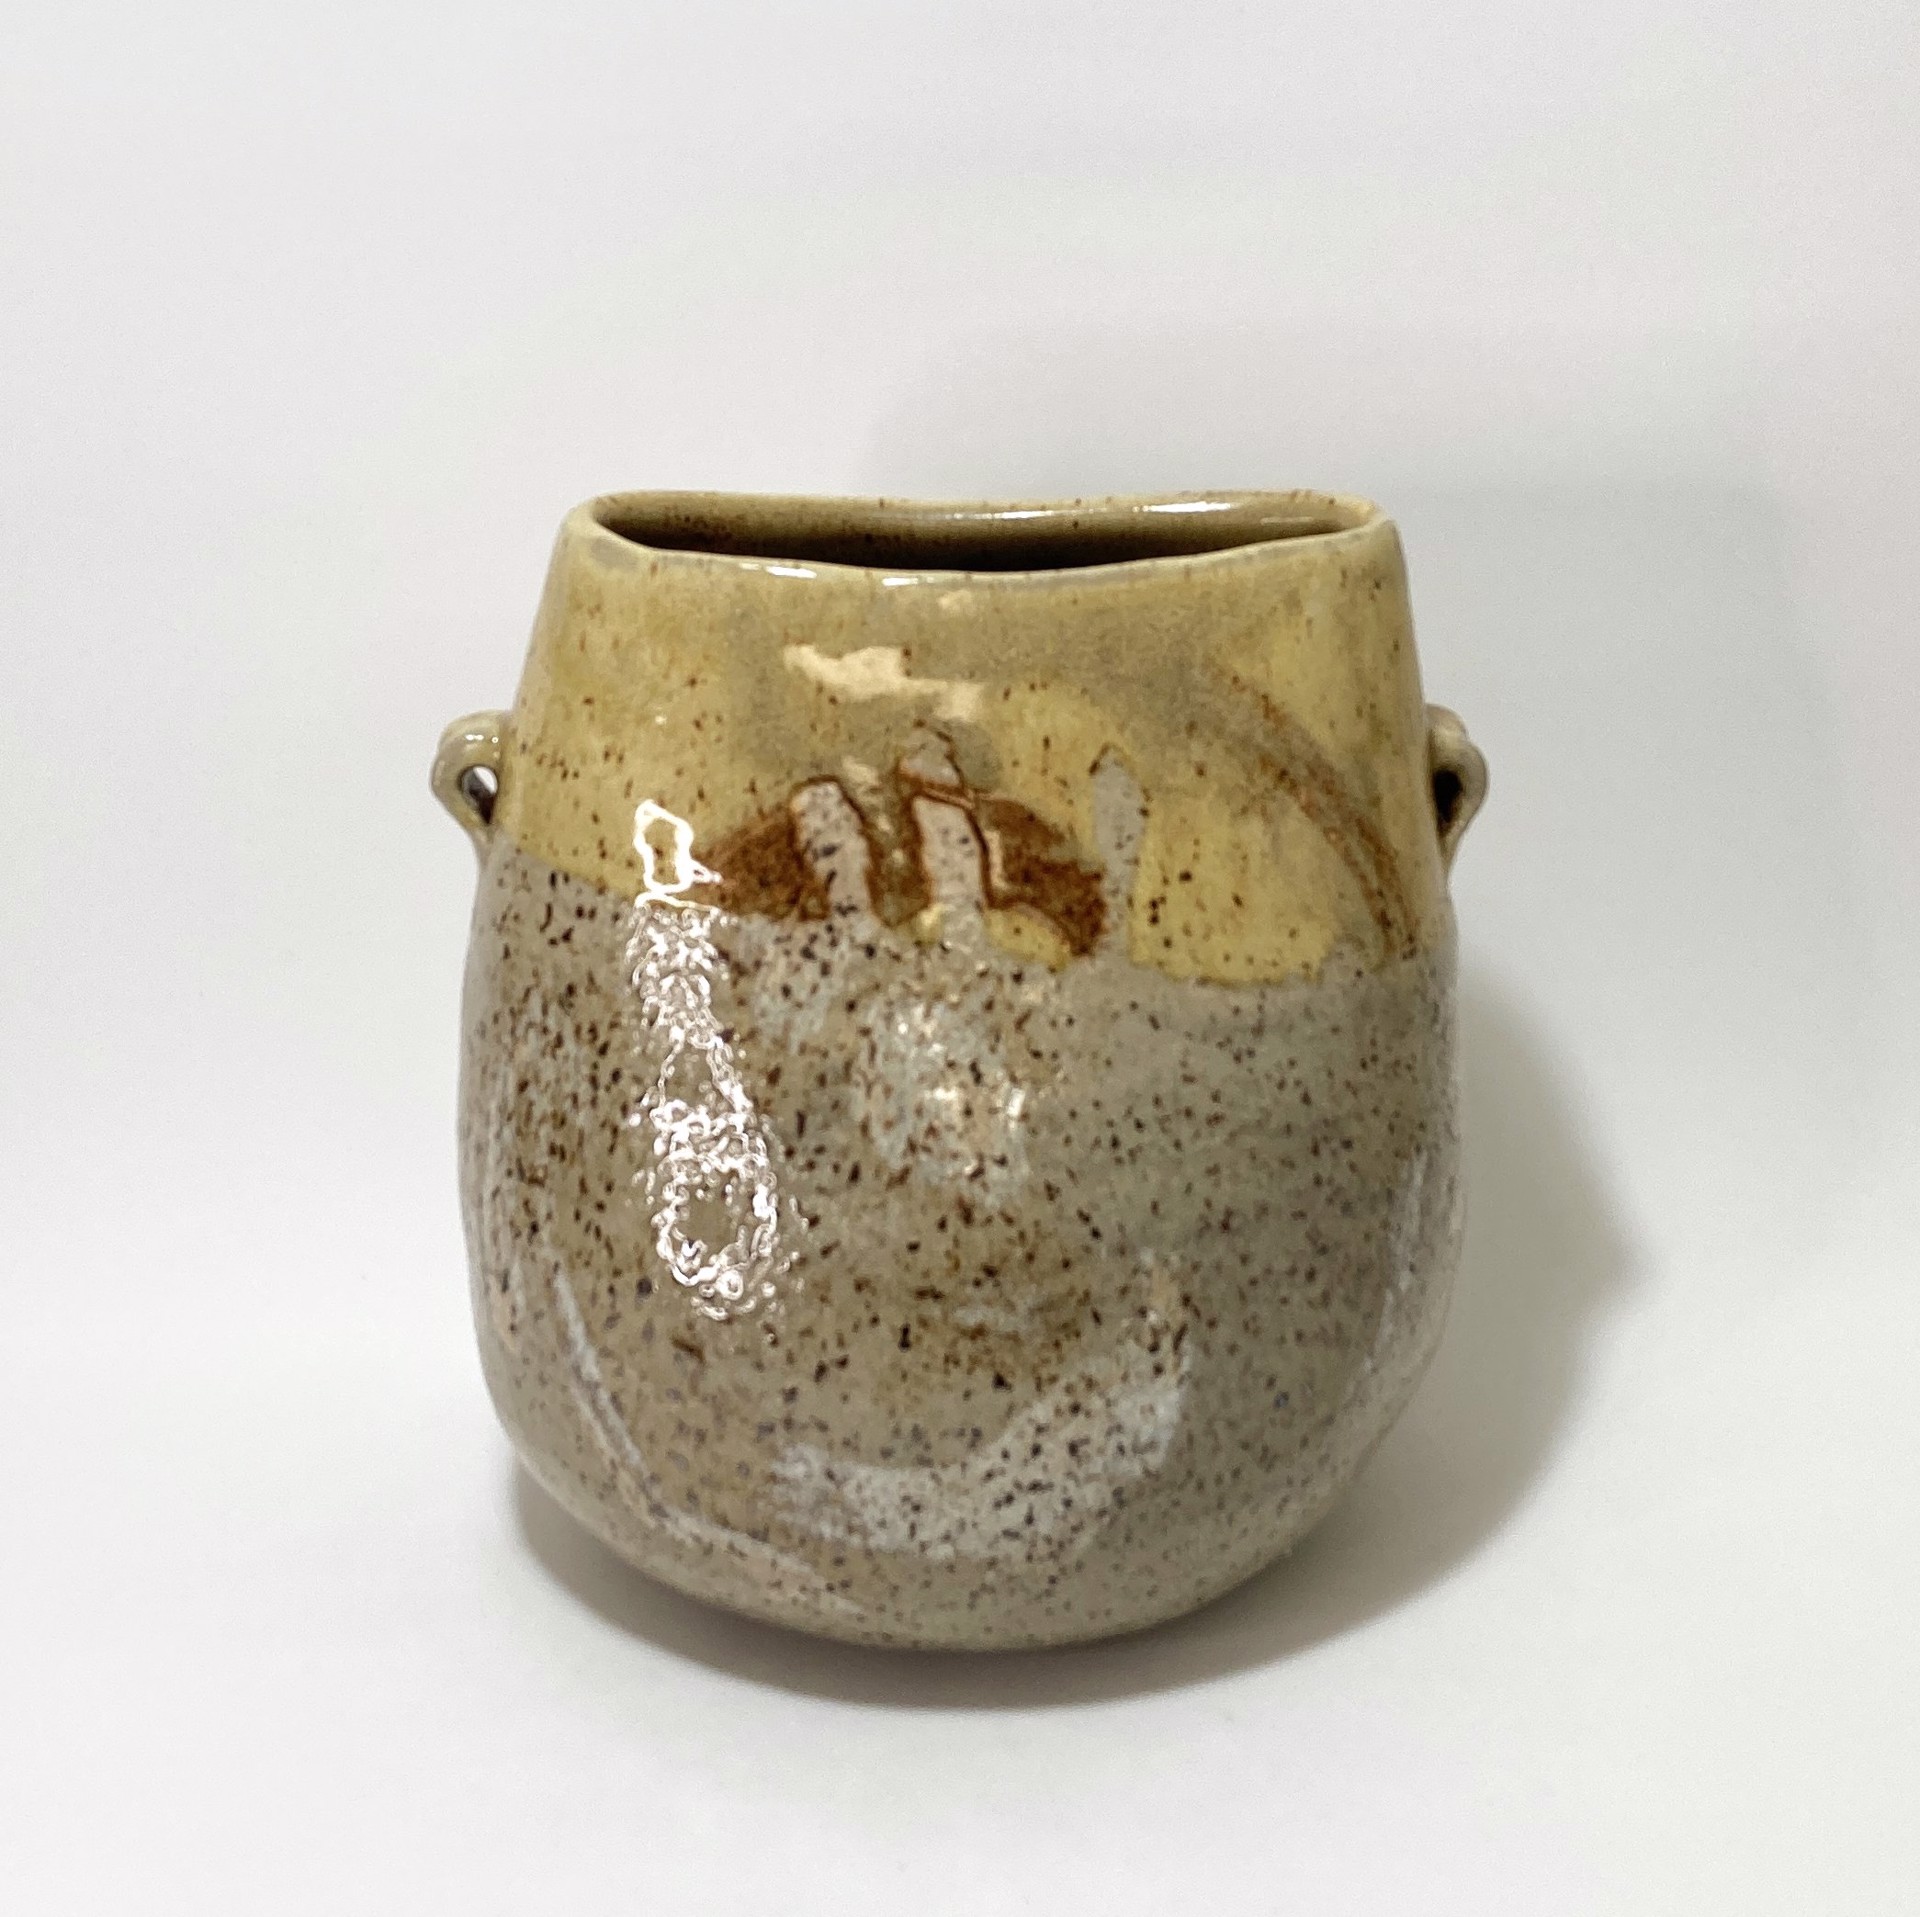 Bucket Pot with 2 Lugs by Mary Delmege